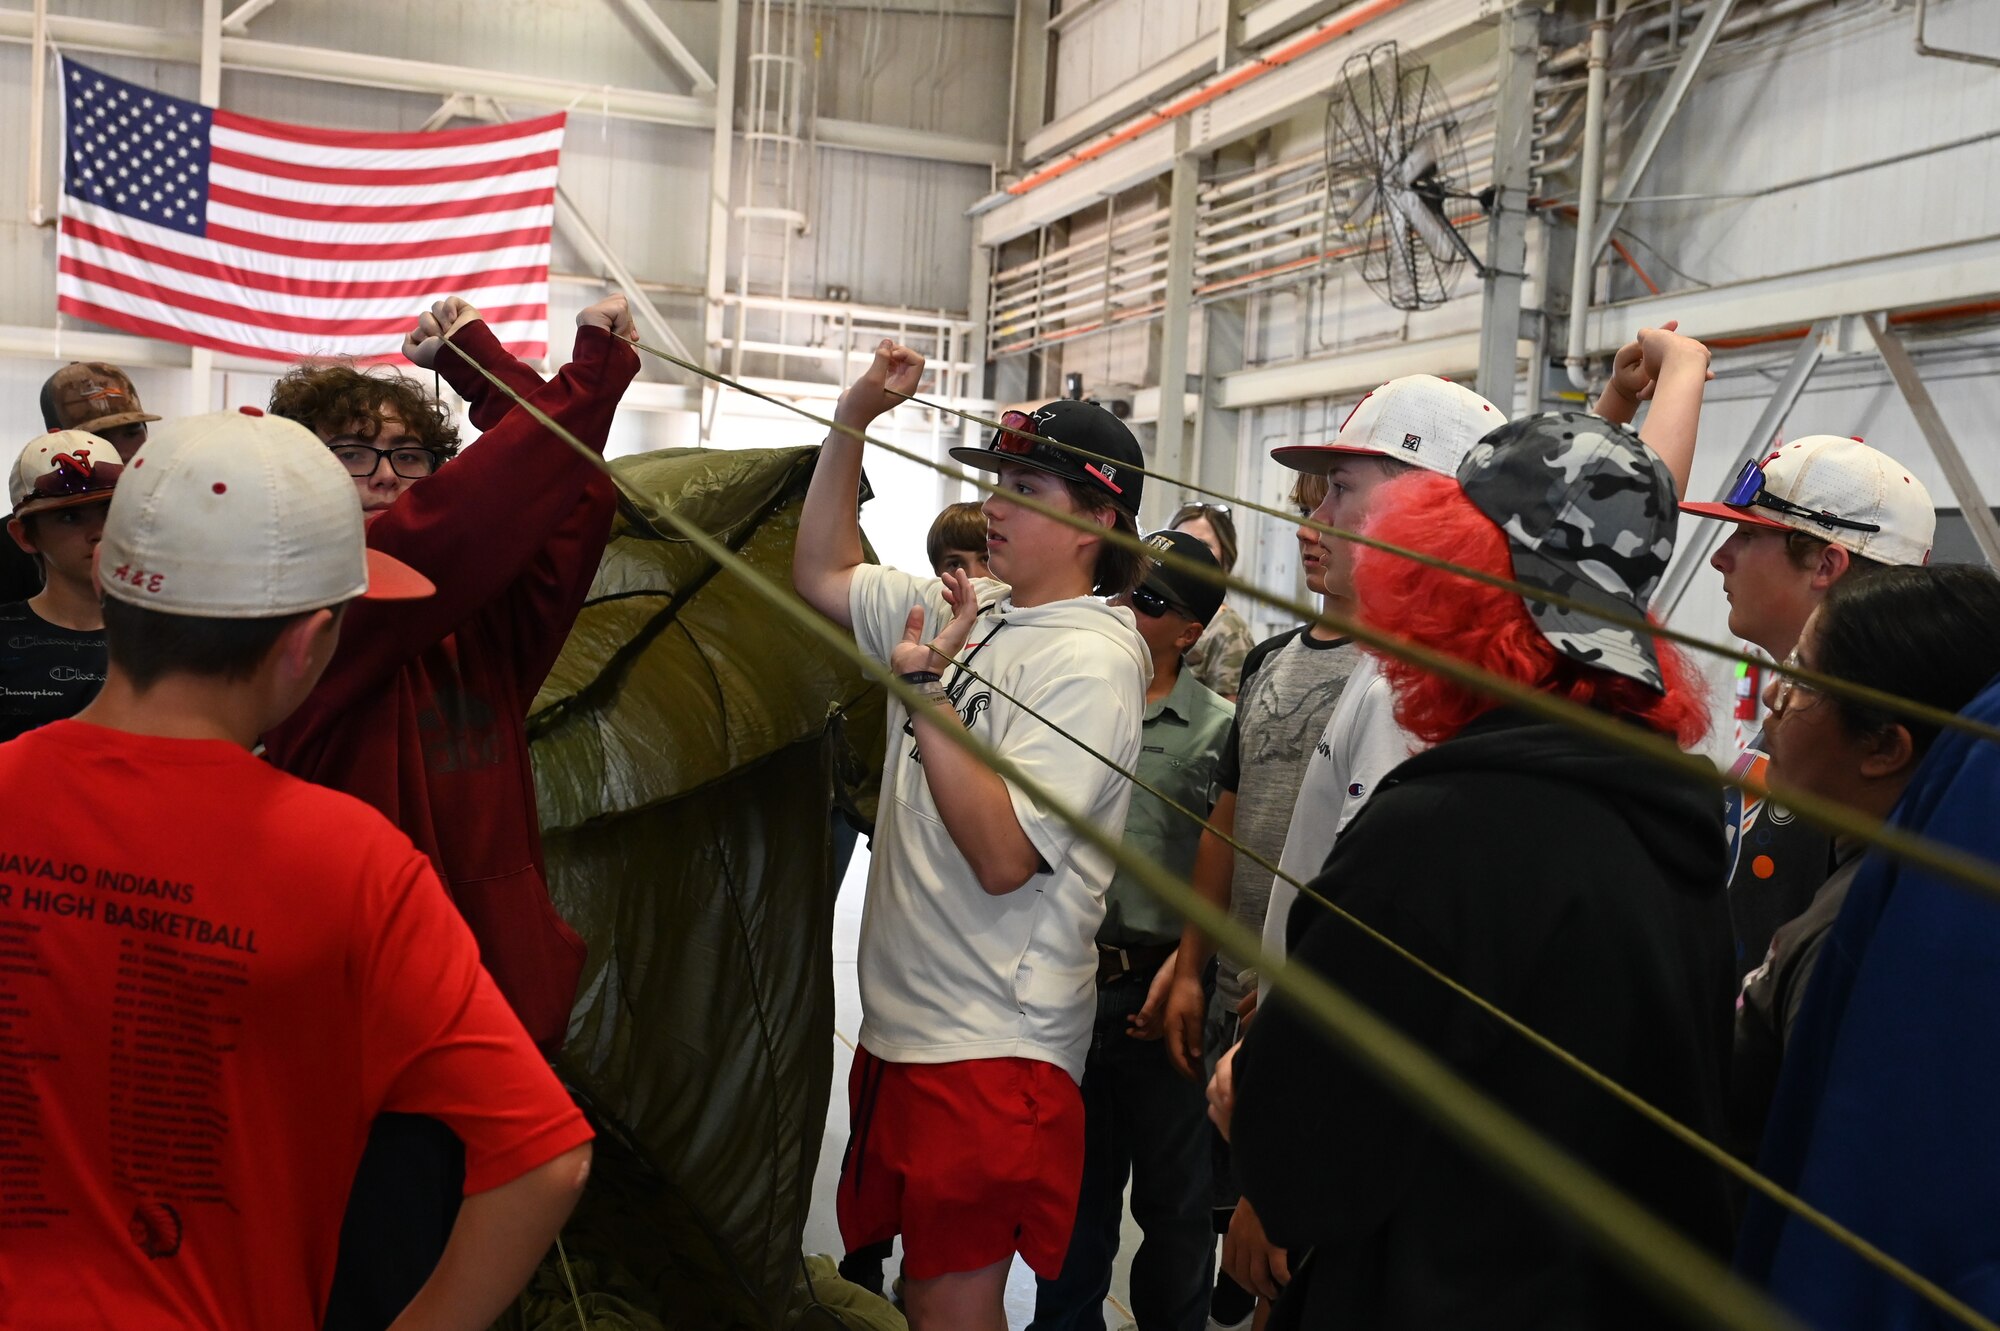 Students from Navajo Public Schools inflate a parachute at the 97th Logistics Readiness Squadron during the Aviation Inspiration and Mentorship Wing tour at Altus Air Force Base, Oklahoma, May 10, 2023. The students utilized team building skills to complete the activity. (U.S. Air Force photo by Airman 1st Class Heidi Bucins)